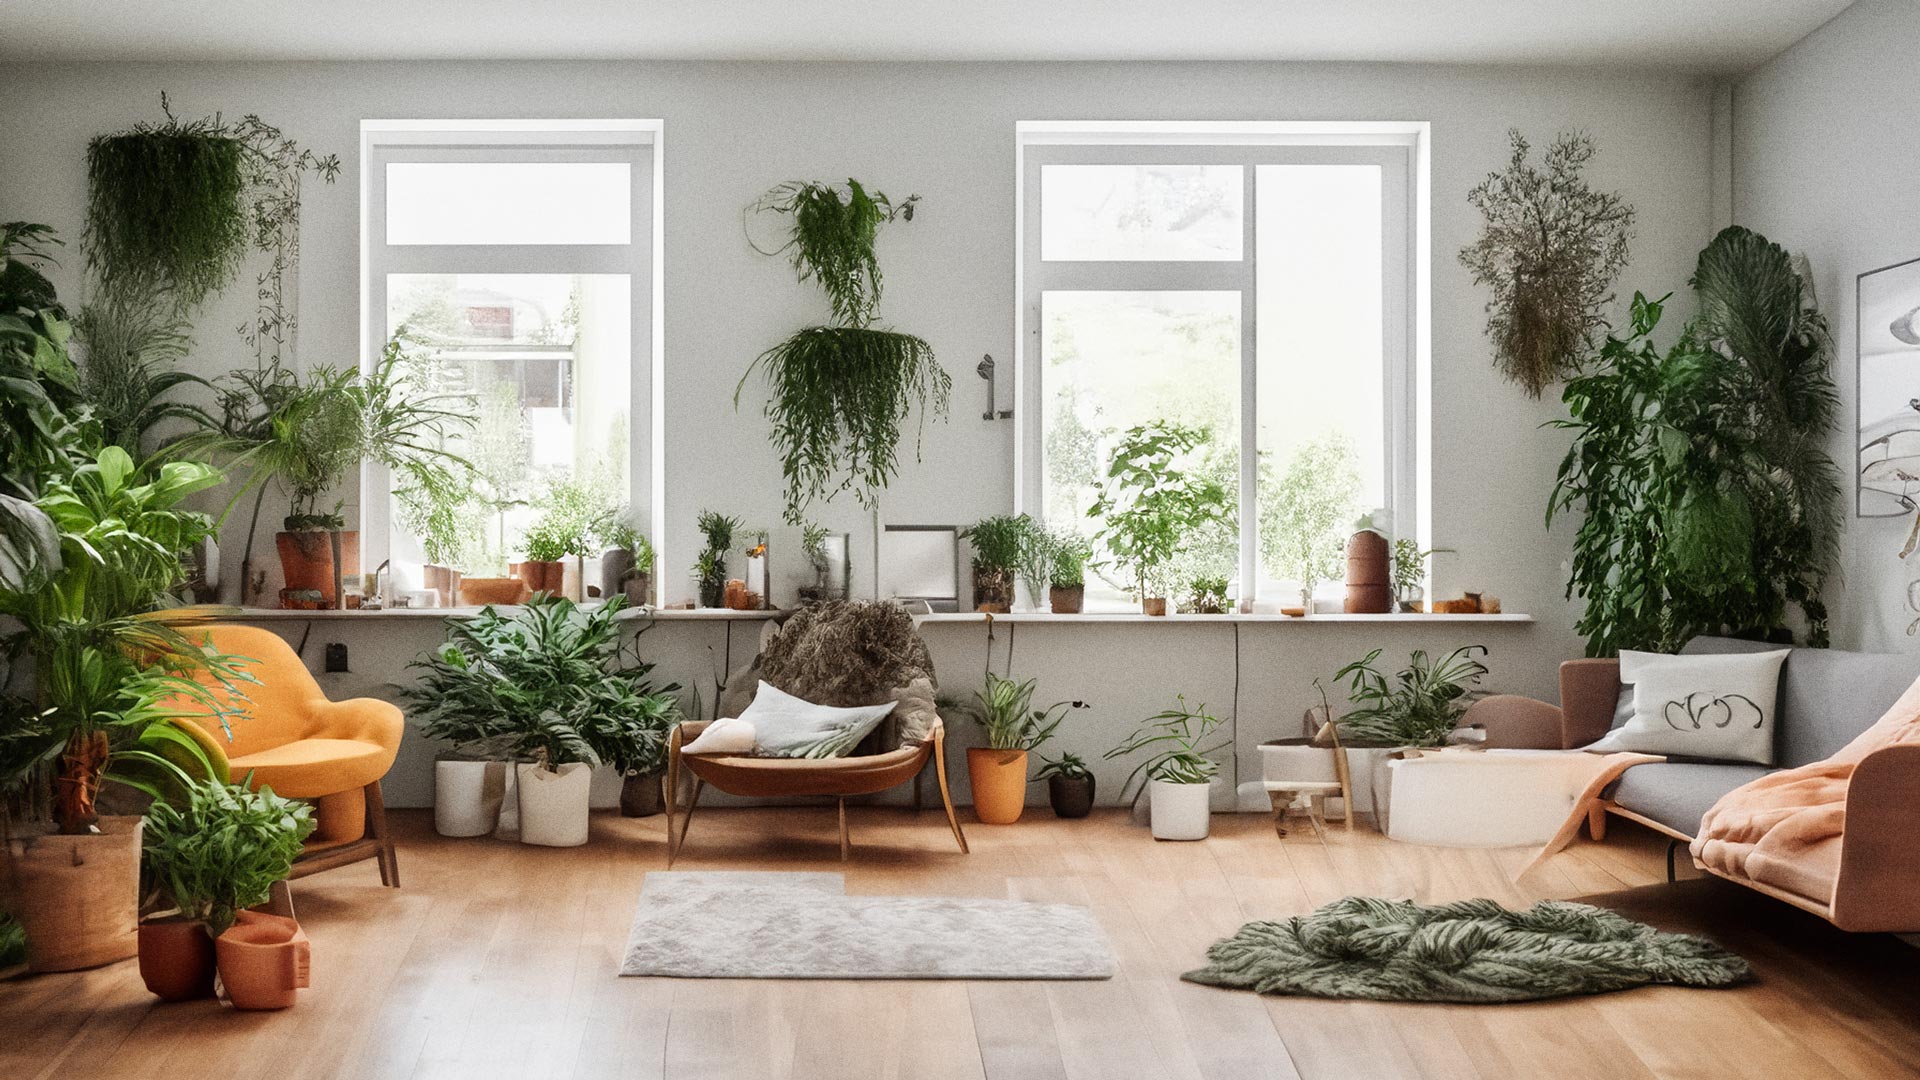 A cozy home interior with plants and natural daylight.